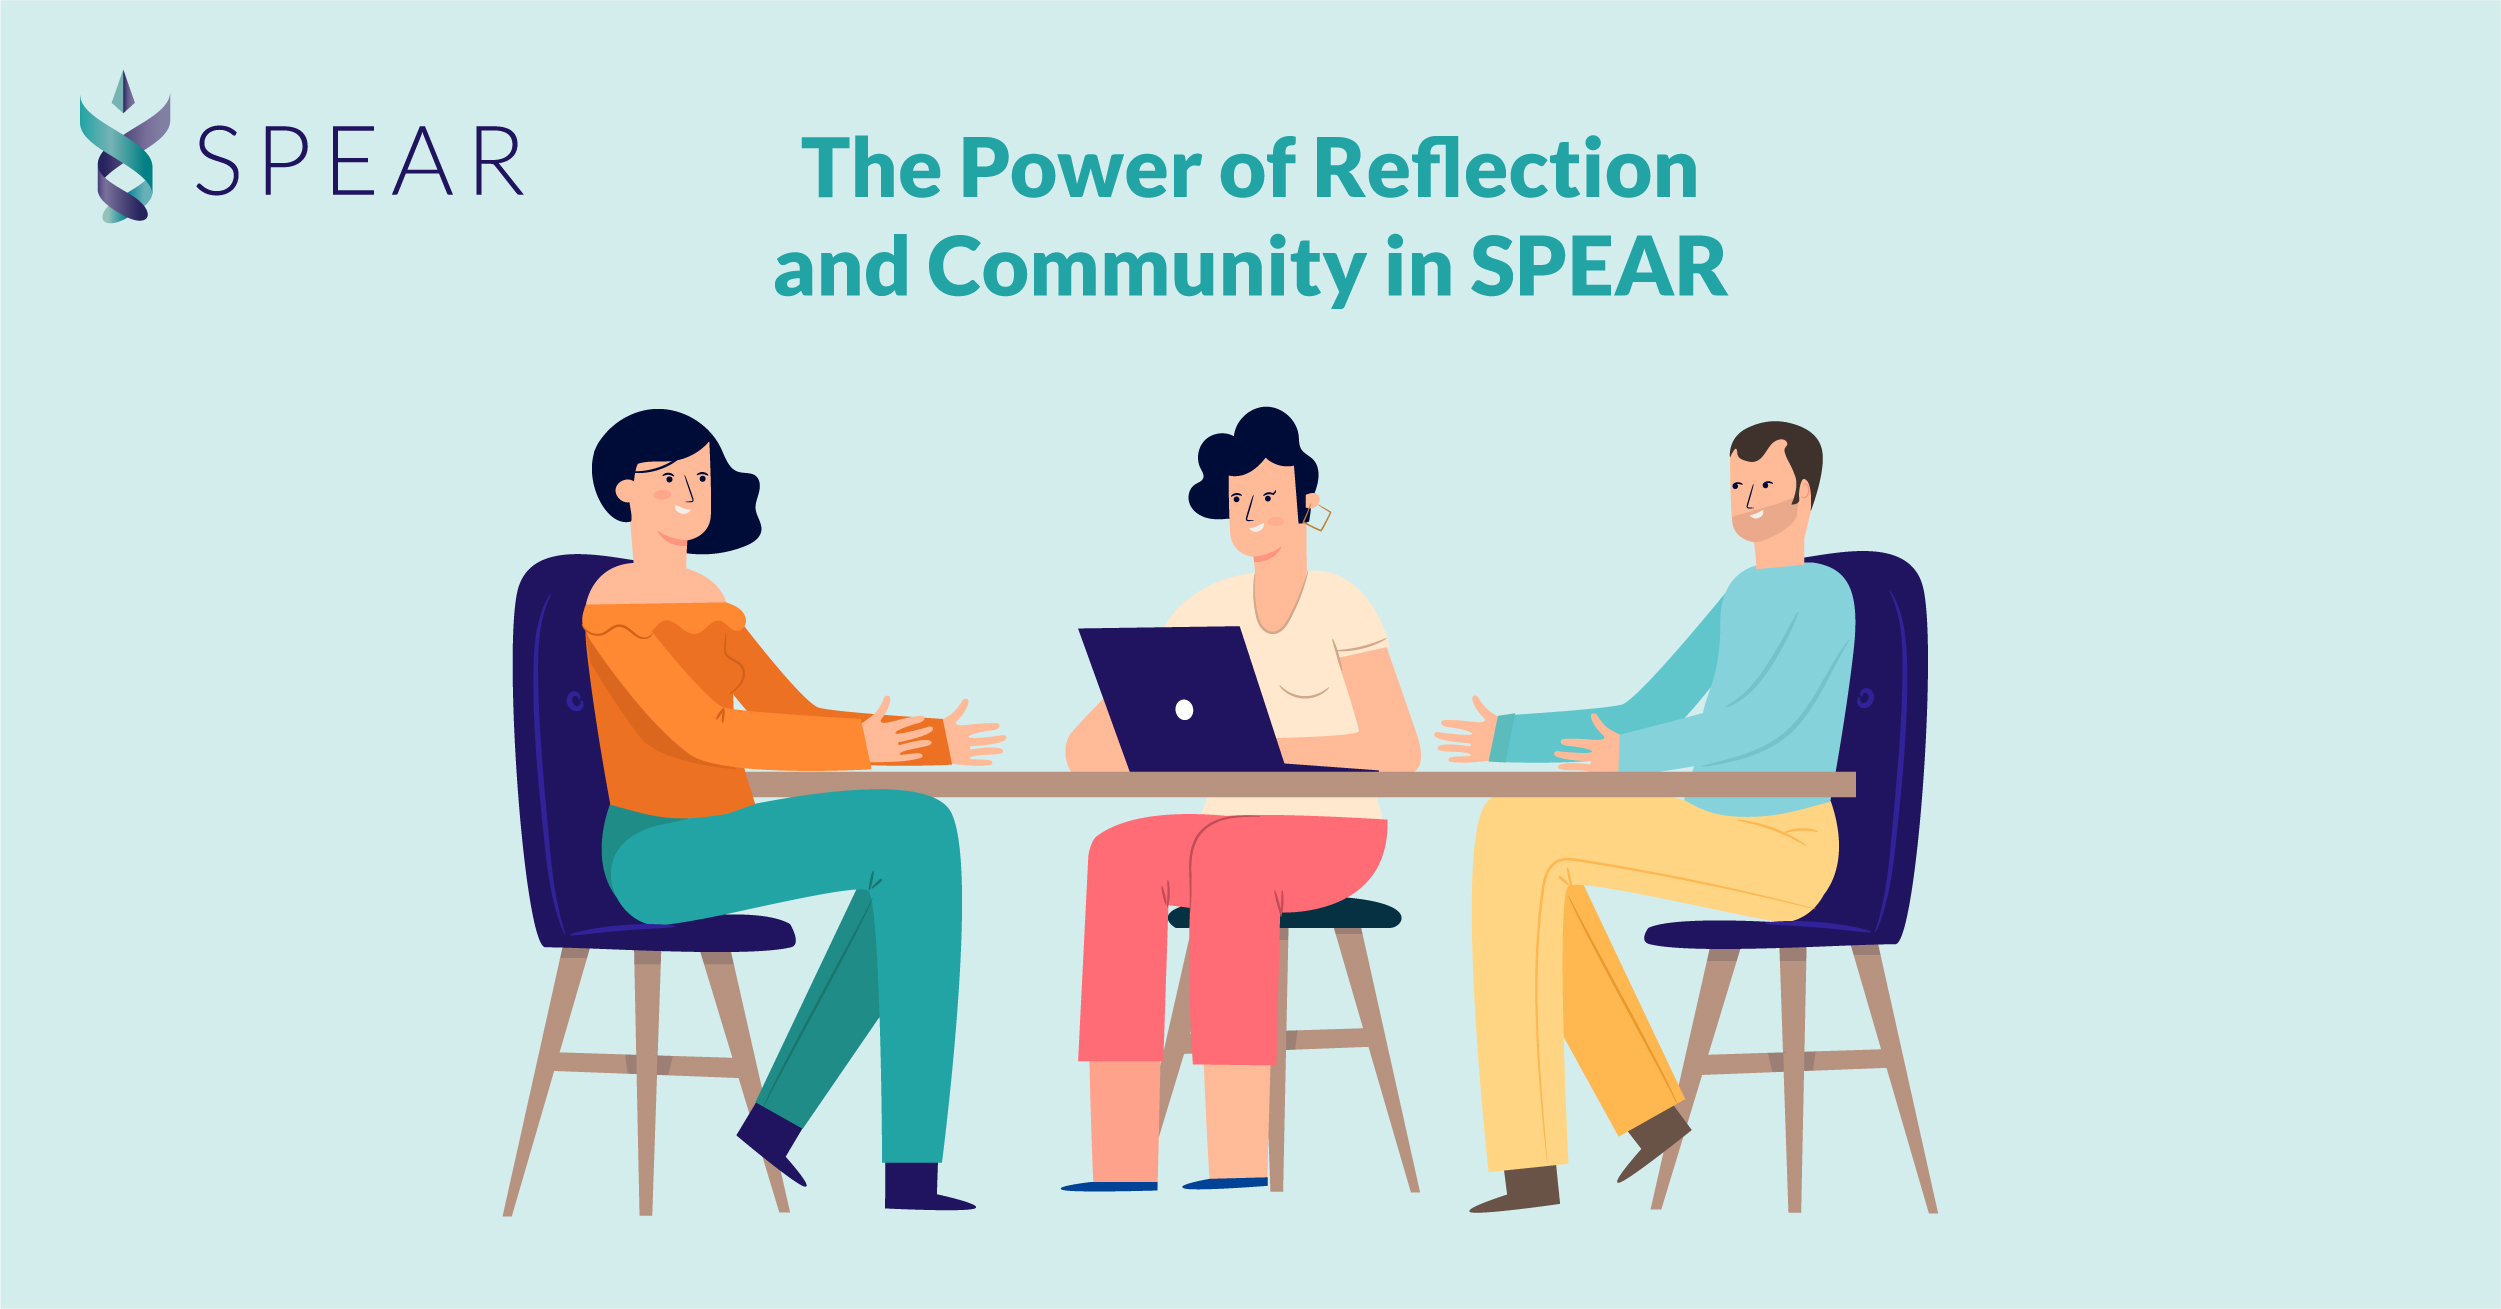 The Power of Reflection and Community in SPEAR